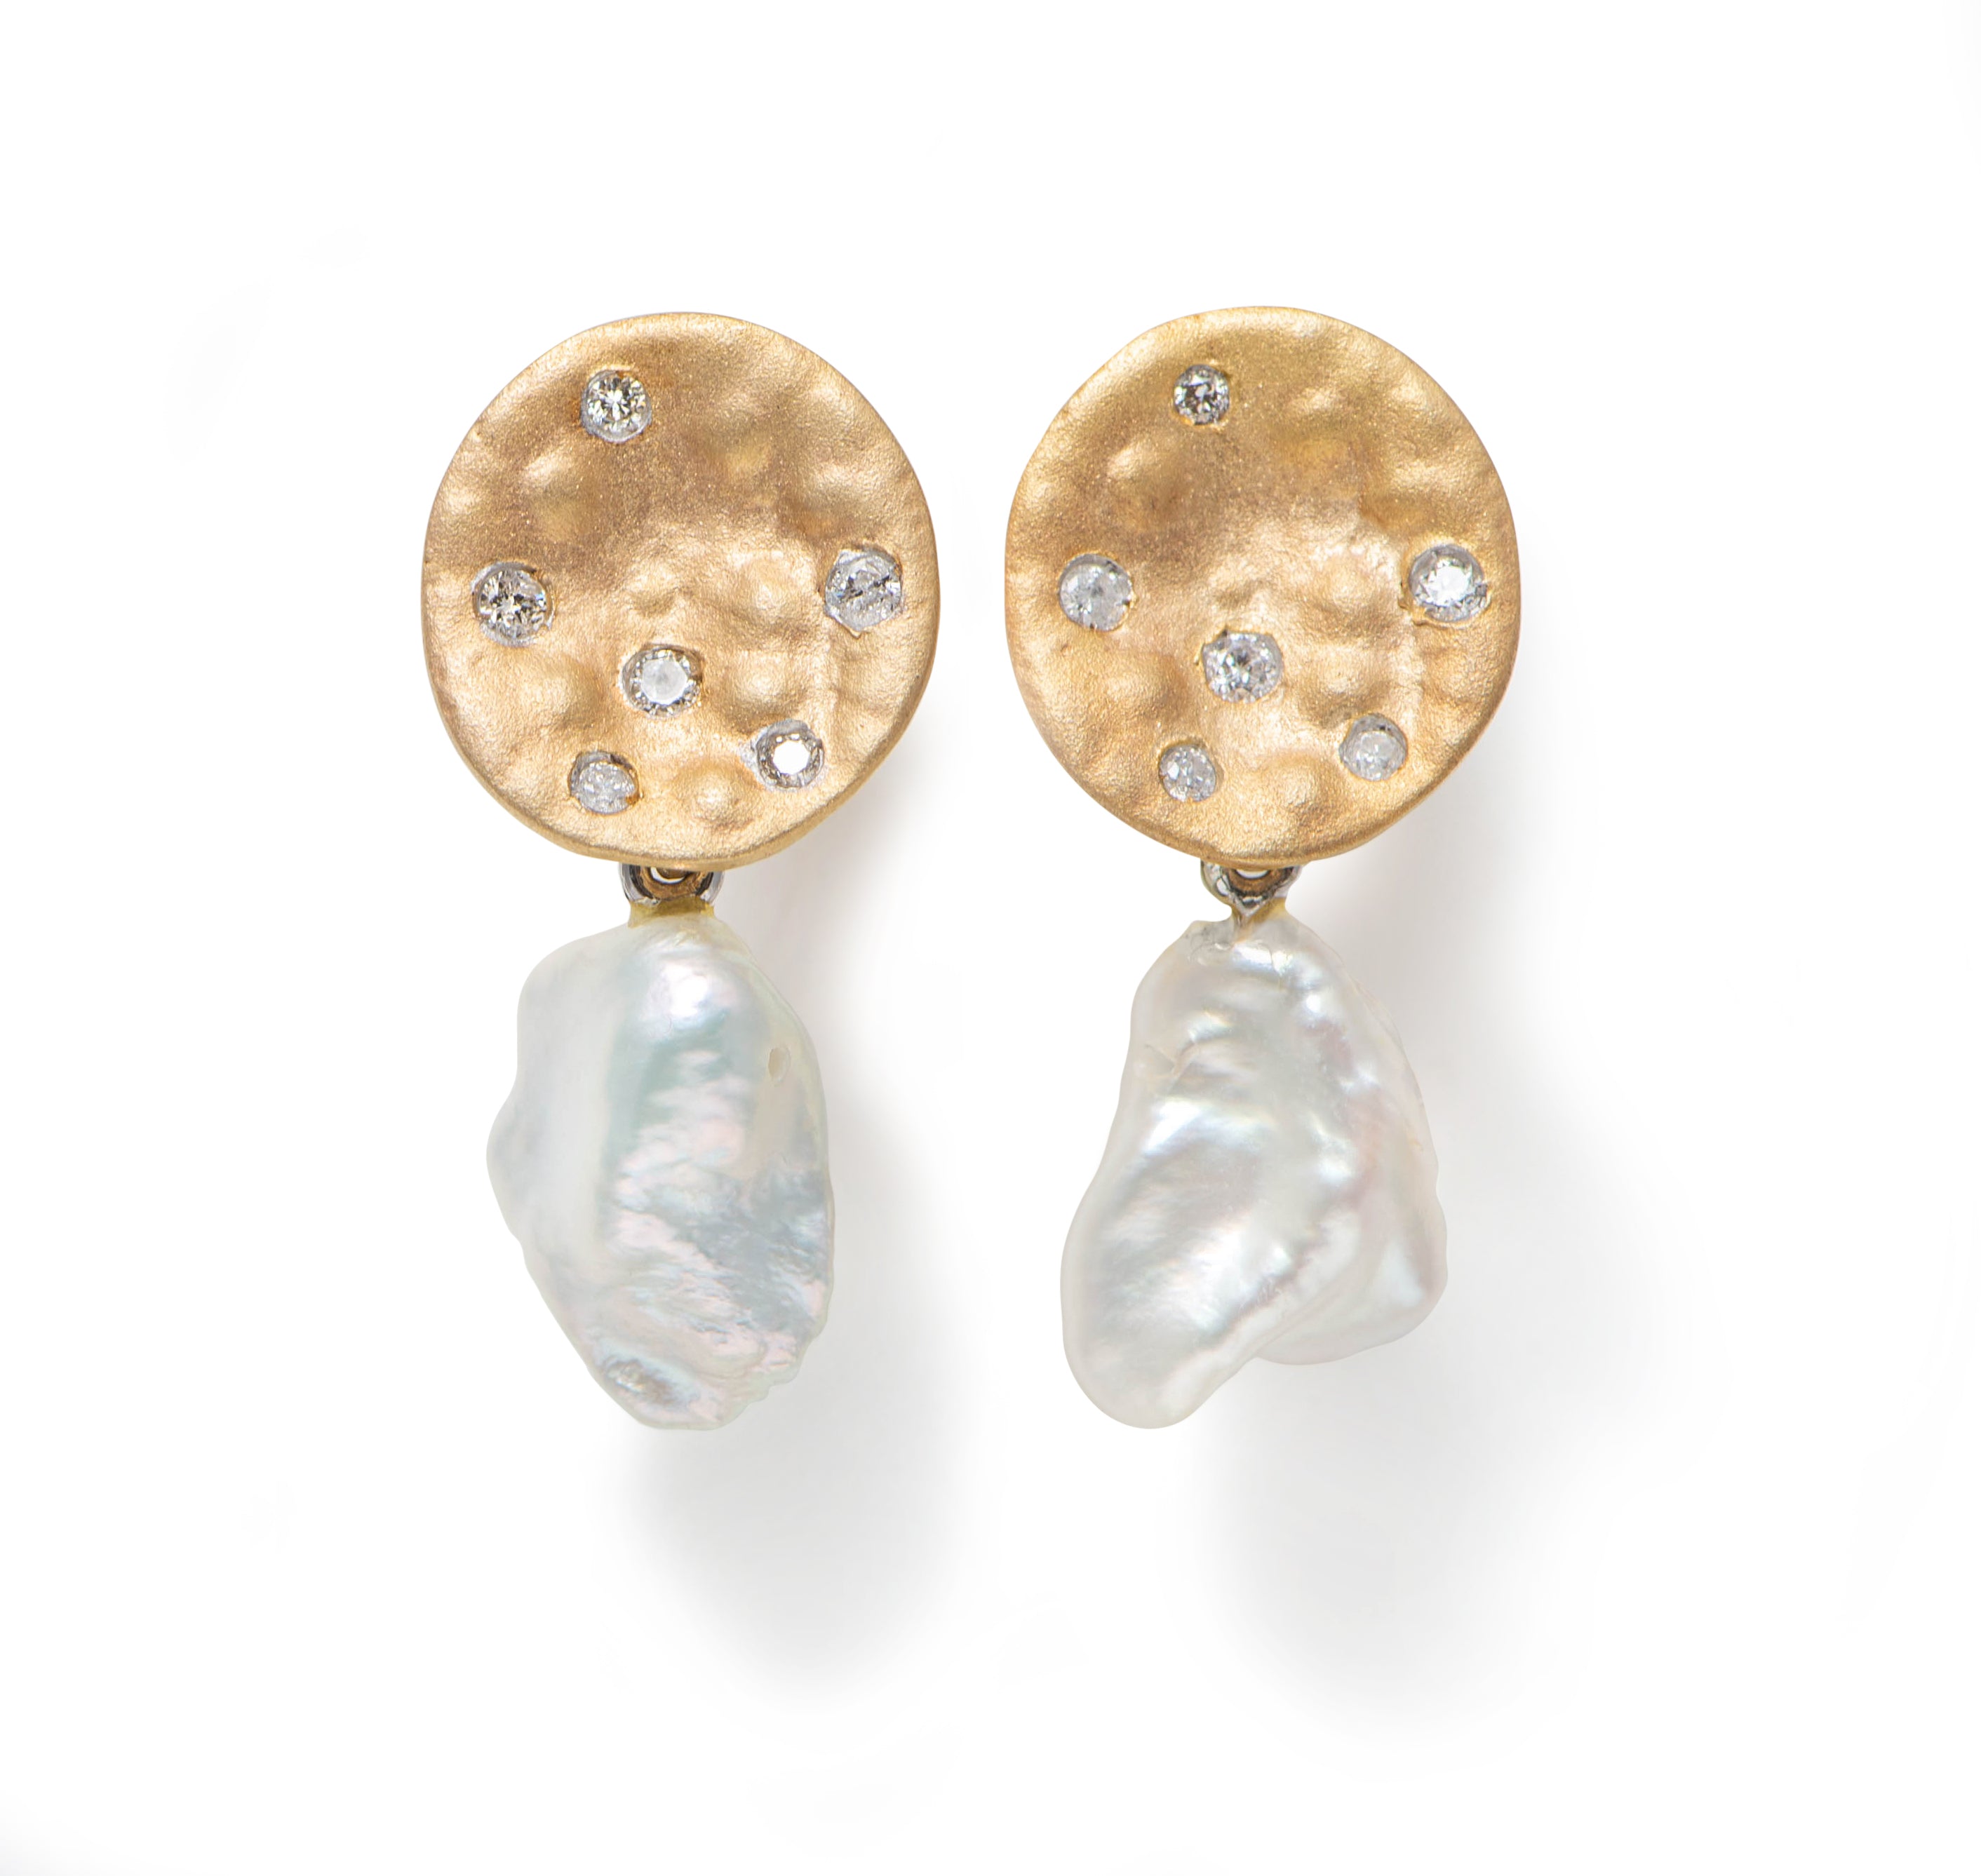 Earrings in 9k Yellow Gold with White Pearl Drop and Diamonds